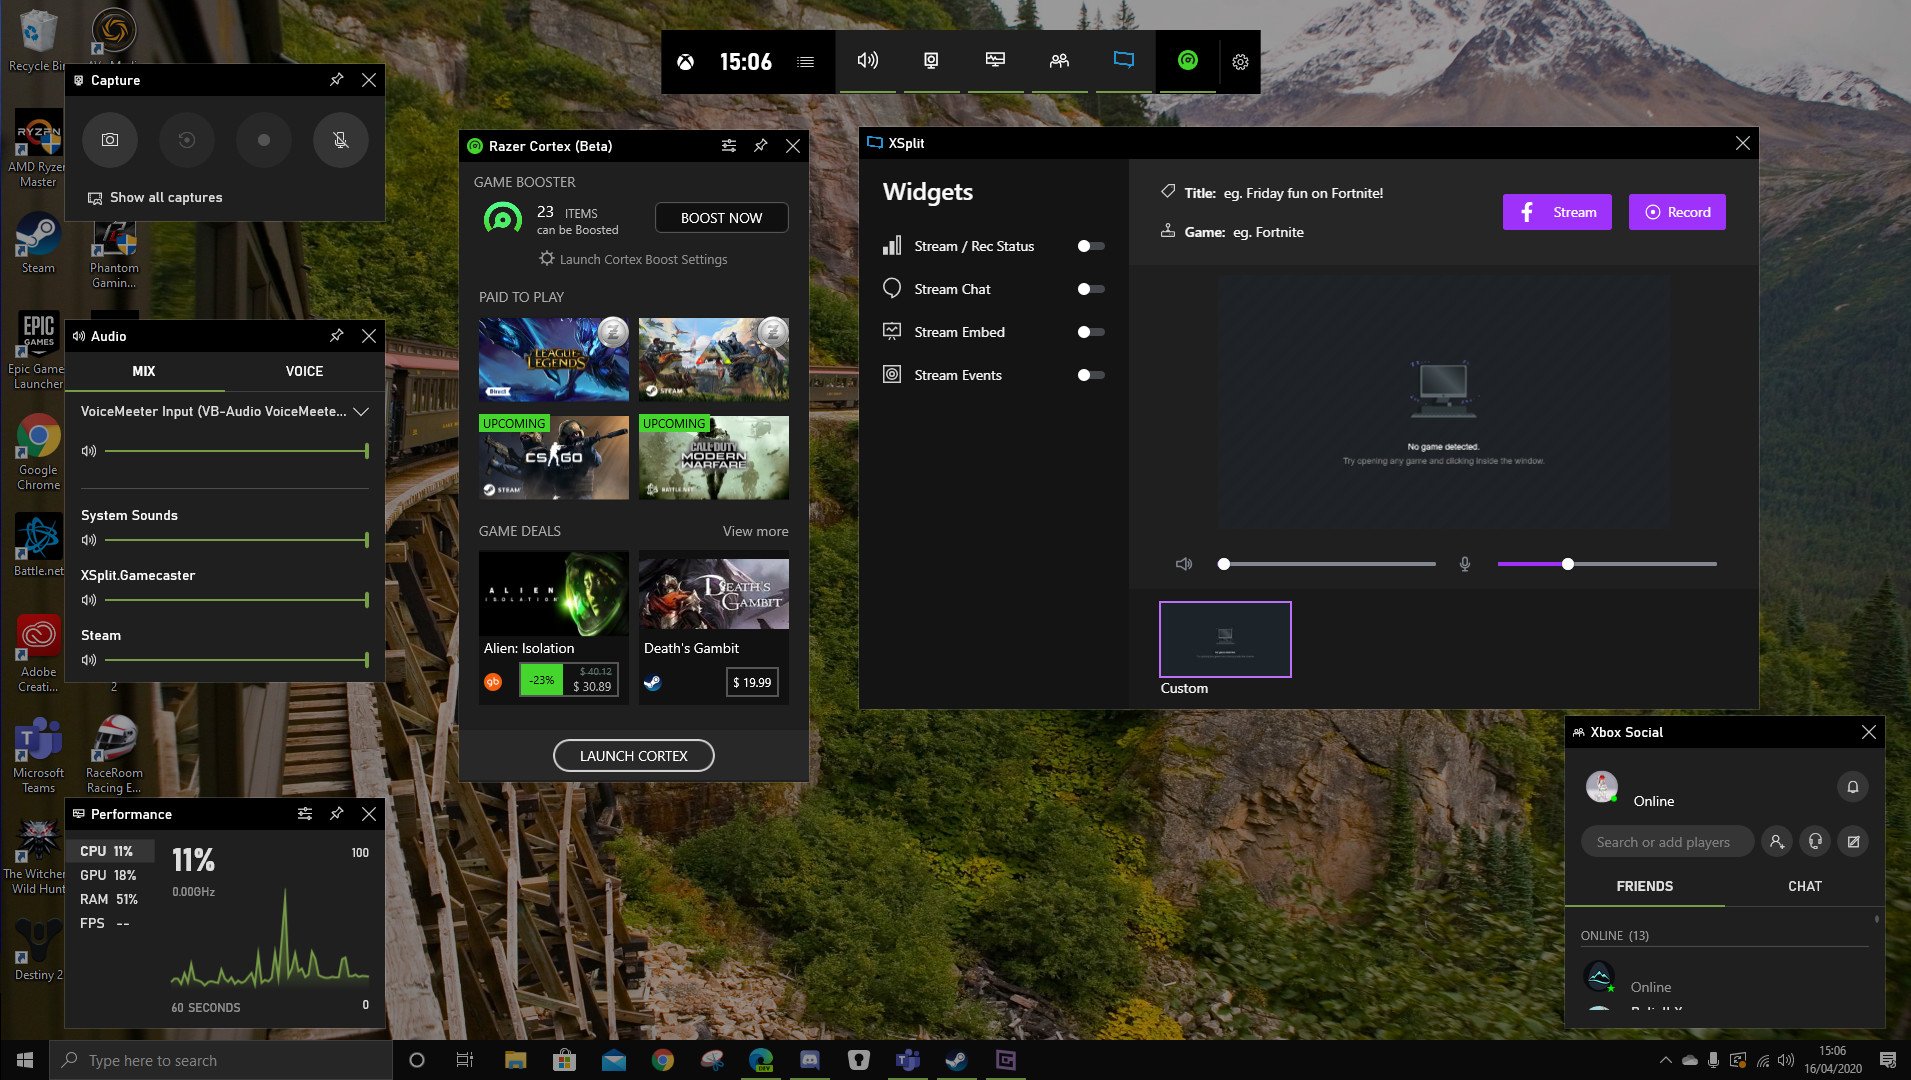 How to get Xbox Game Bar Widgets Store on Windows 11 [Guide]